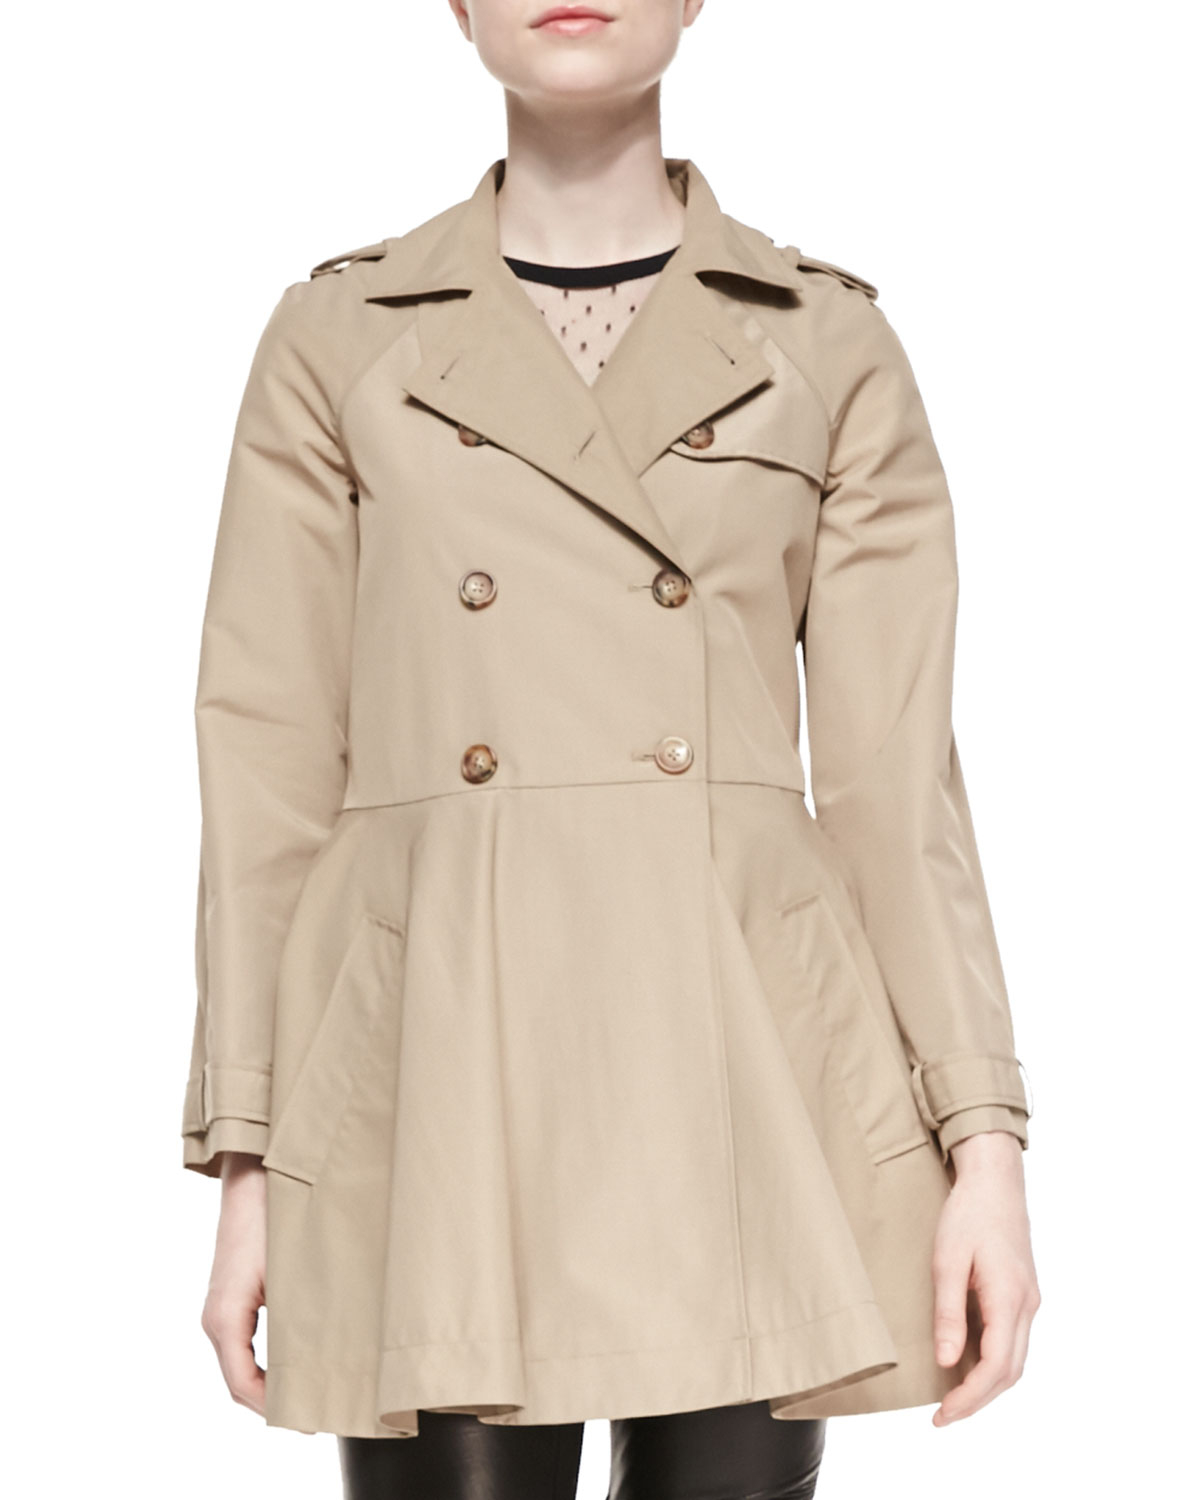 Lyst - Red Valentino Double-Breasted A-Line Skirt Trench Coat in Natural